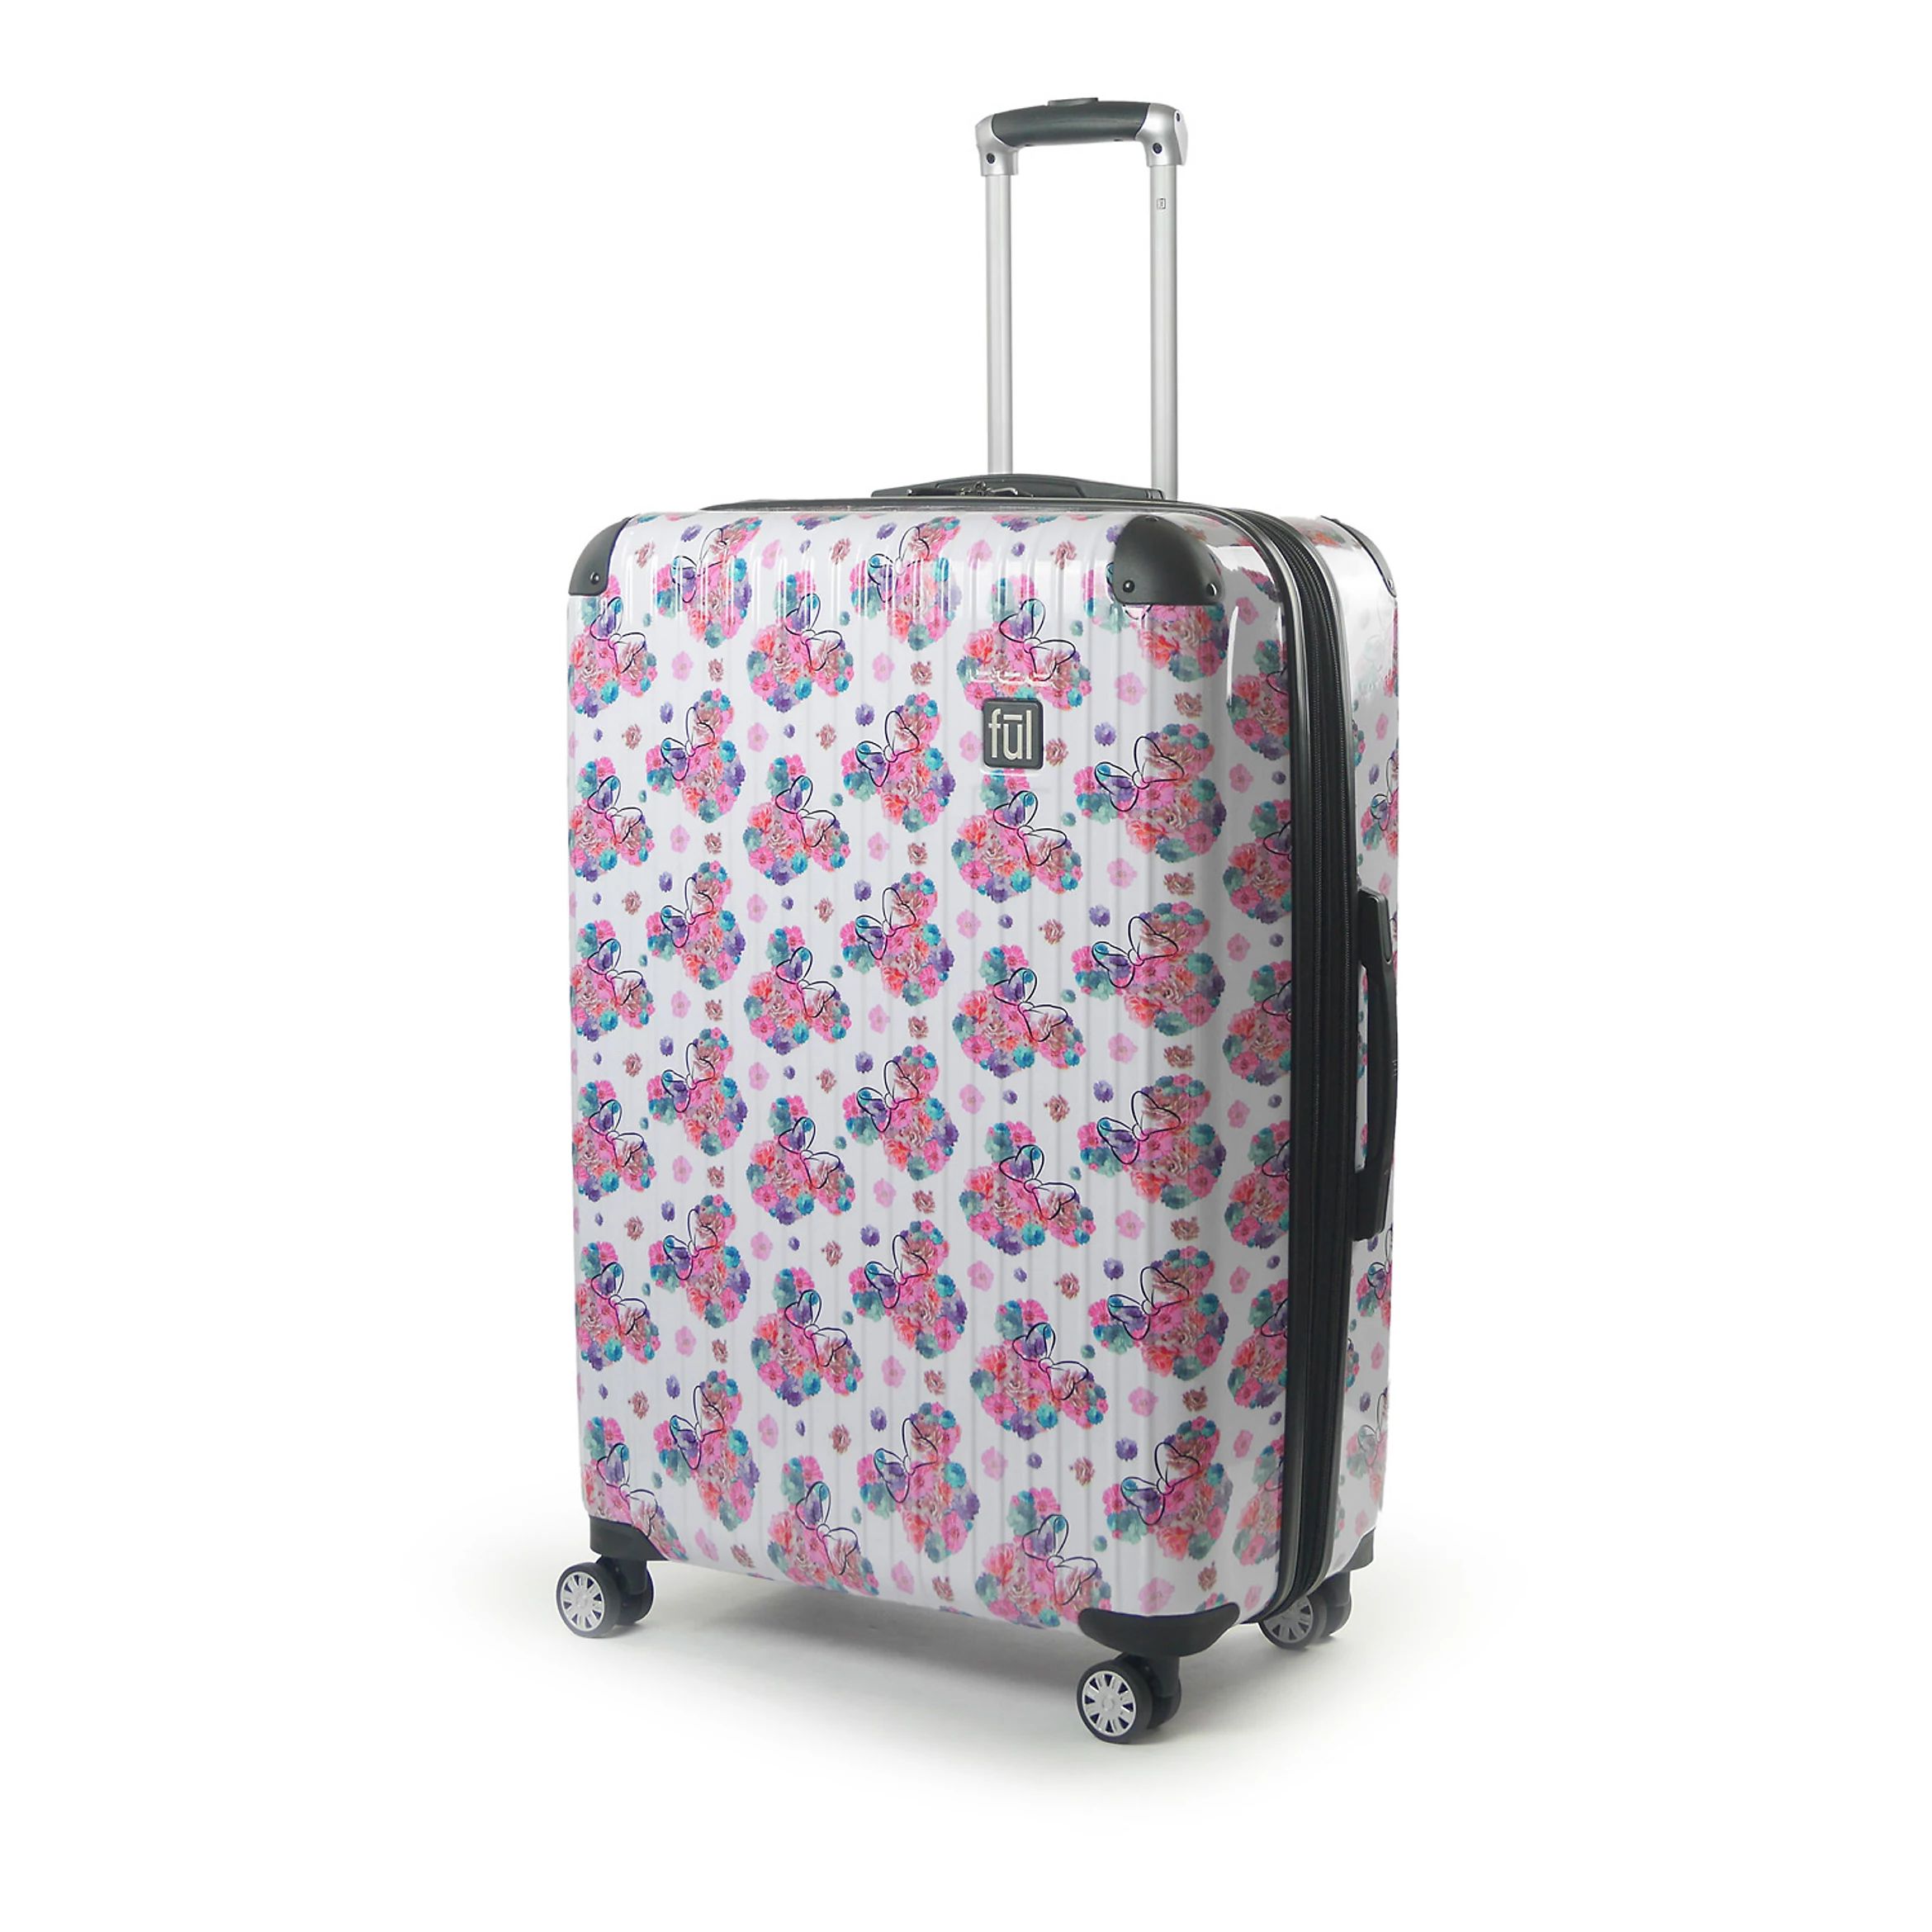 FUL Disney Minnie Mouse Floral Printed Hardside Spinner Luggage | Kohl's